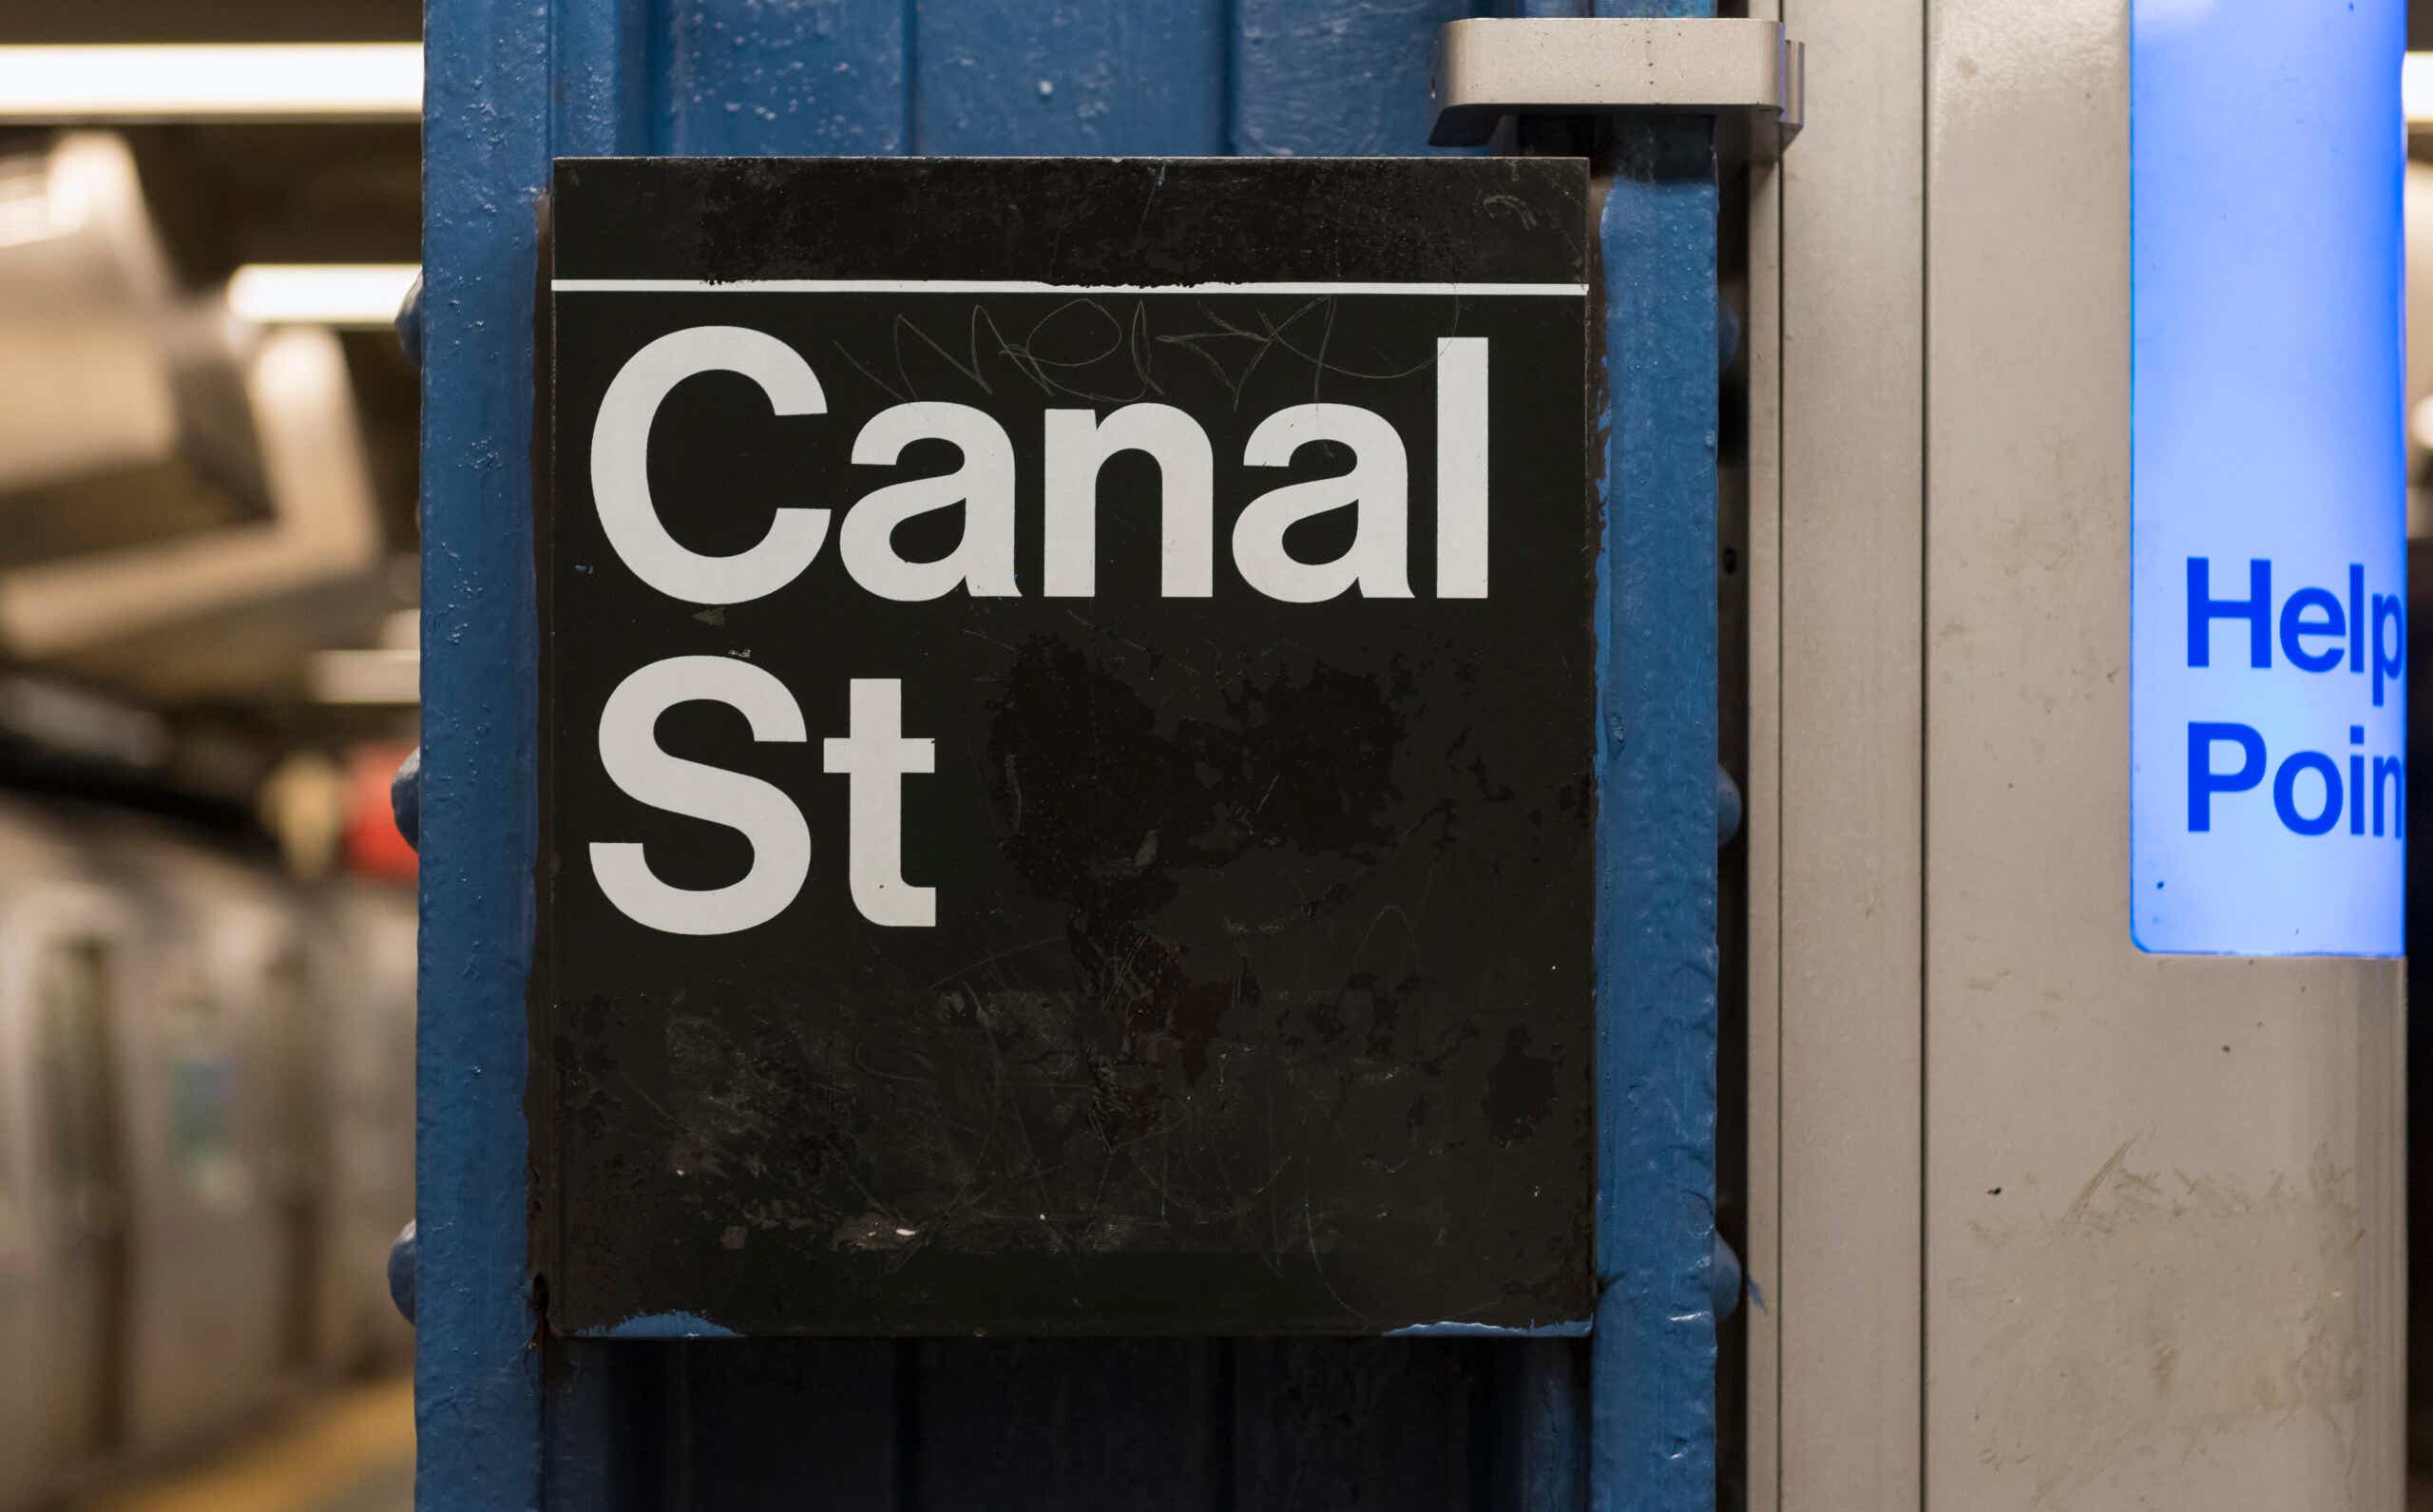 Canal street station